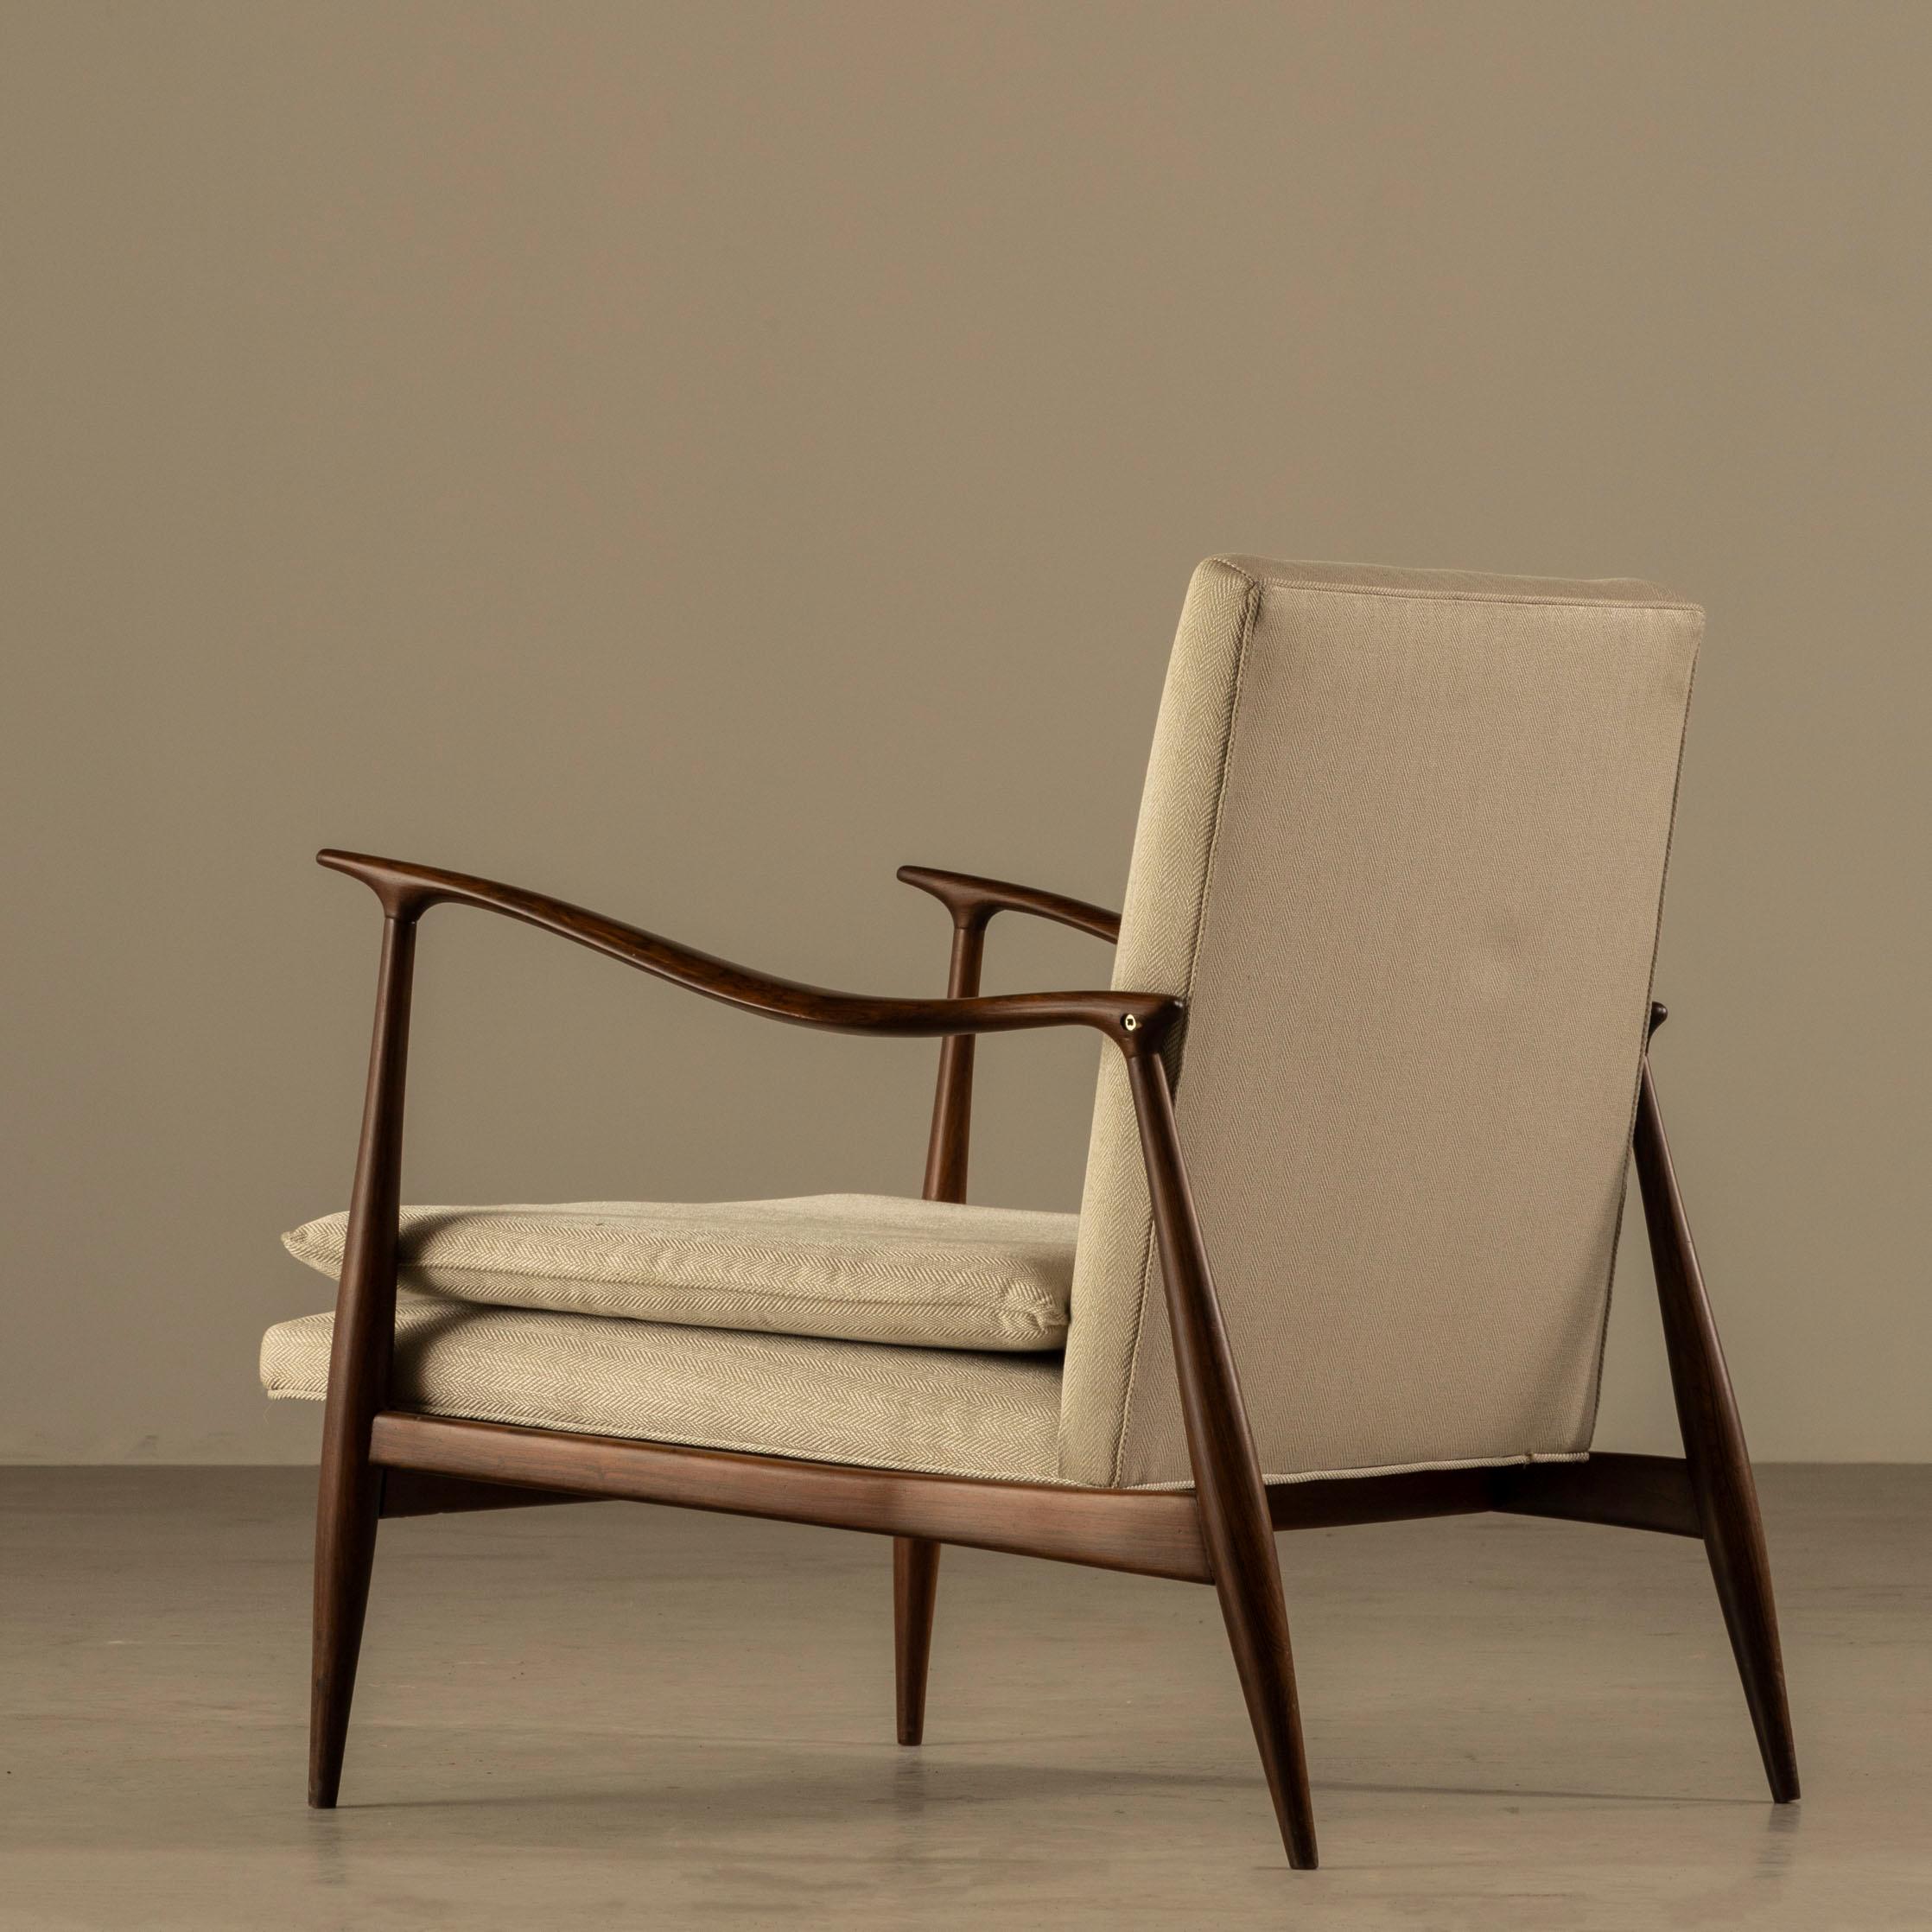 Lounge Chair by Giuseppe Scapinelli, Brazilian Mid-Century Modern In Excellent Condition For Sale In Sao Paulo, SP